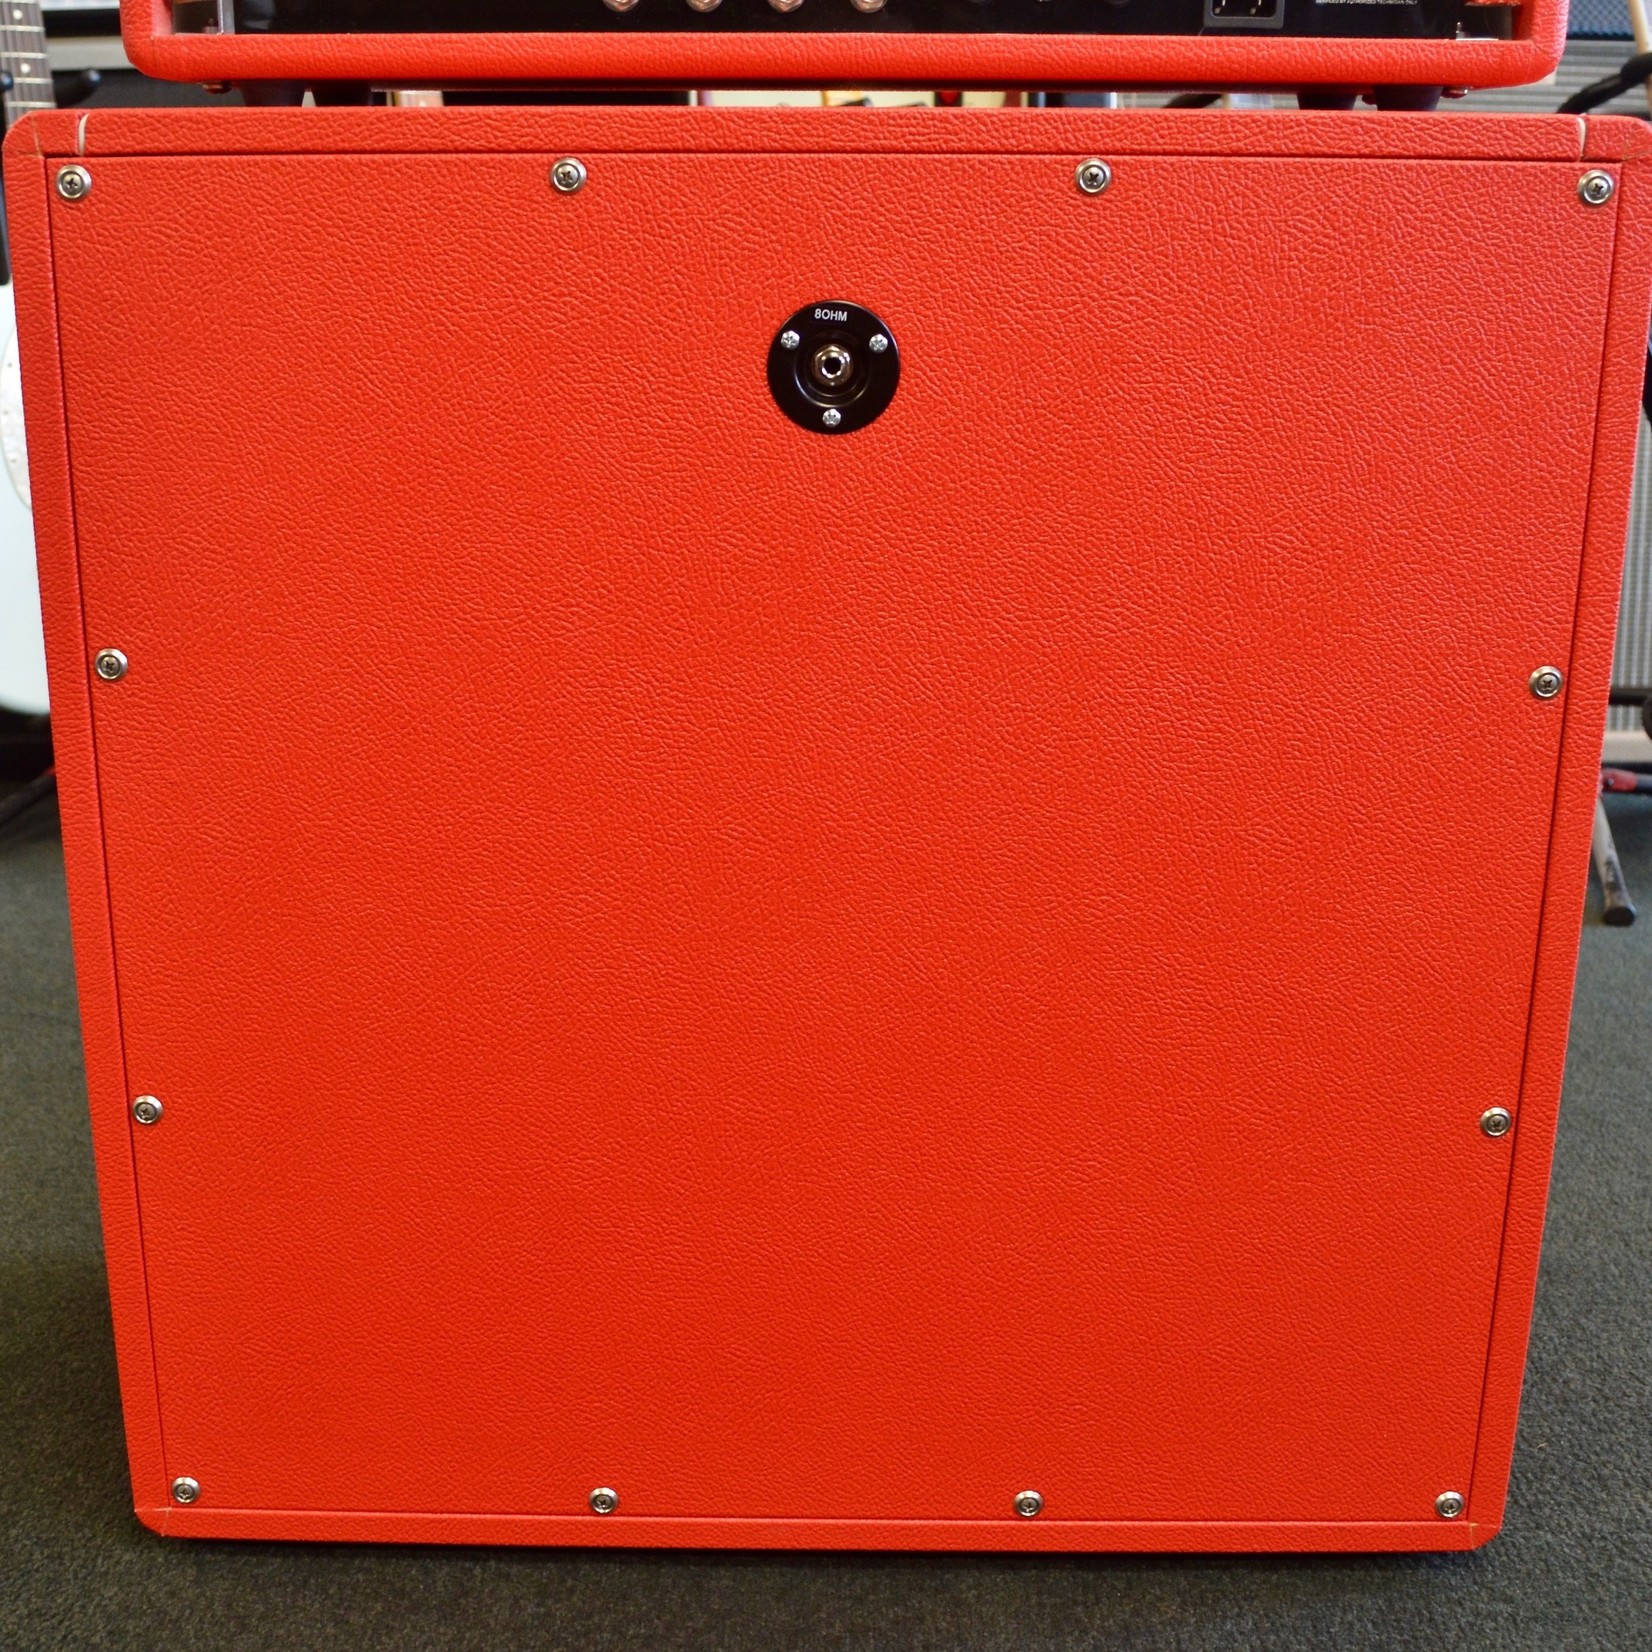 Divided By 13 Divided By 13 JTR 9-15 w/ matching 2x12 cab Red/Red